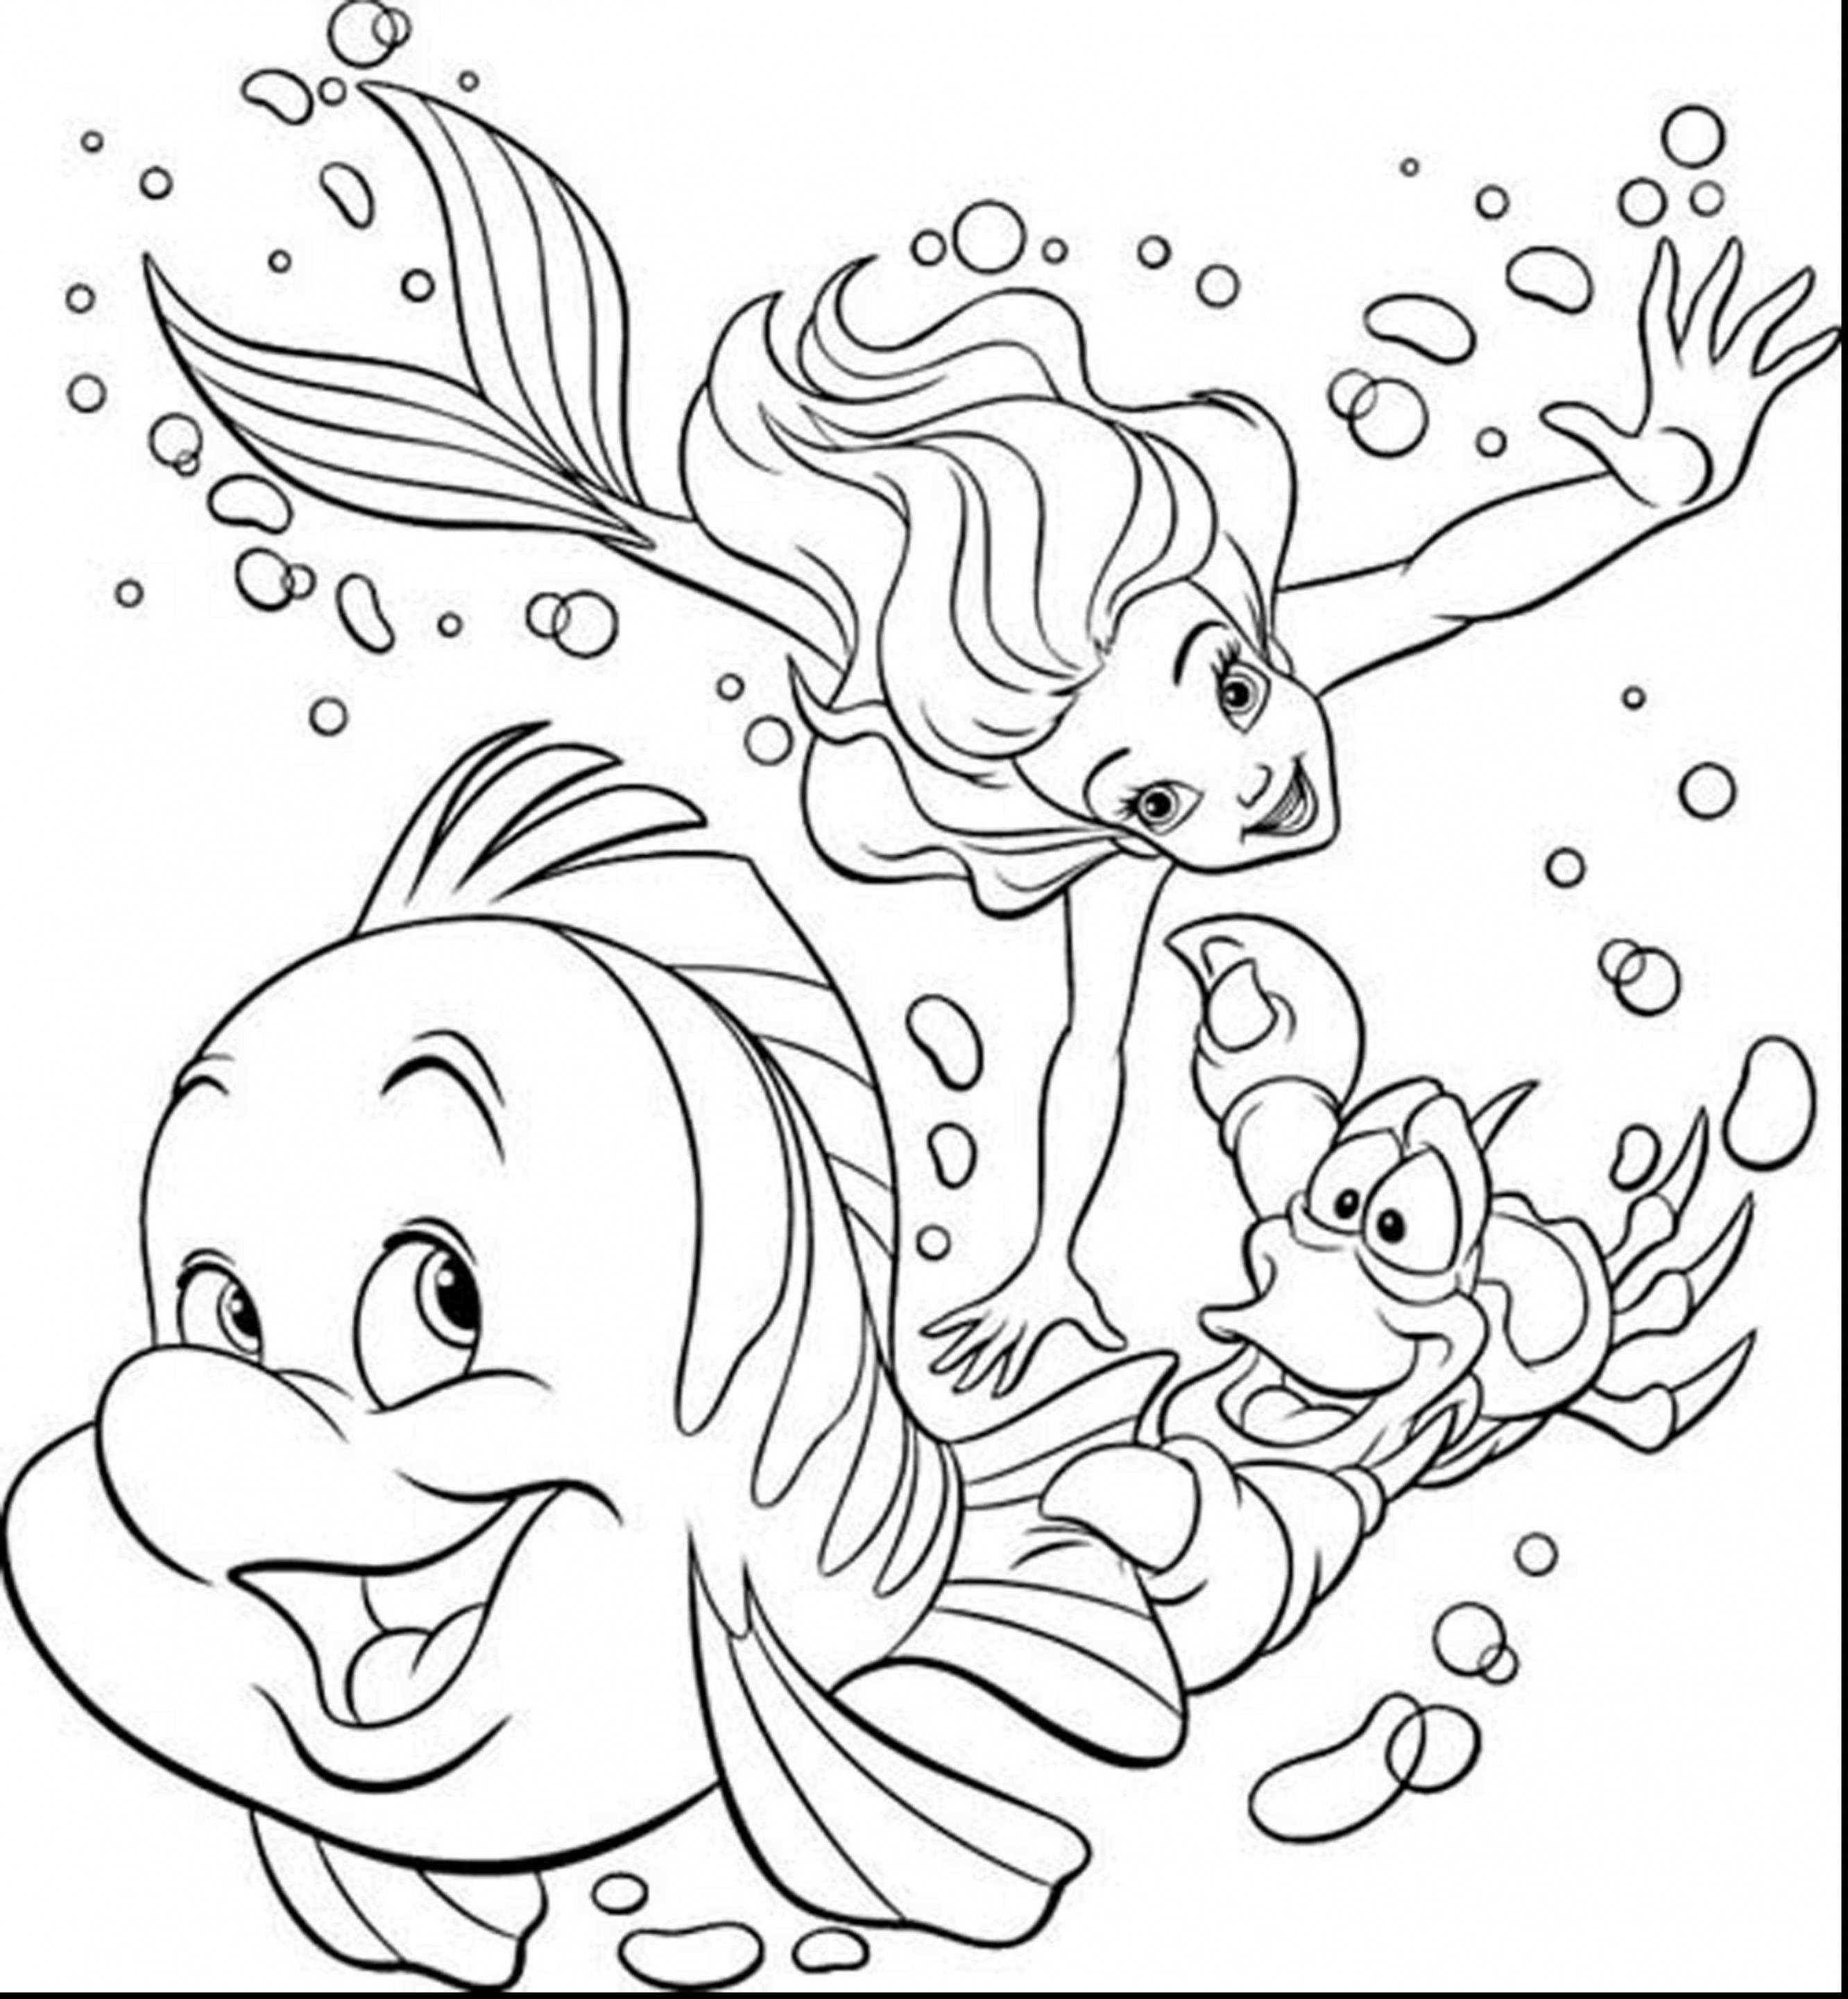 Princess Coloring Pages for Adults Wallpaper